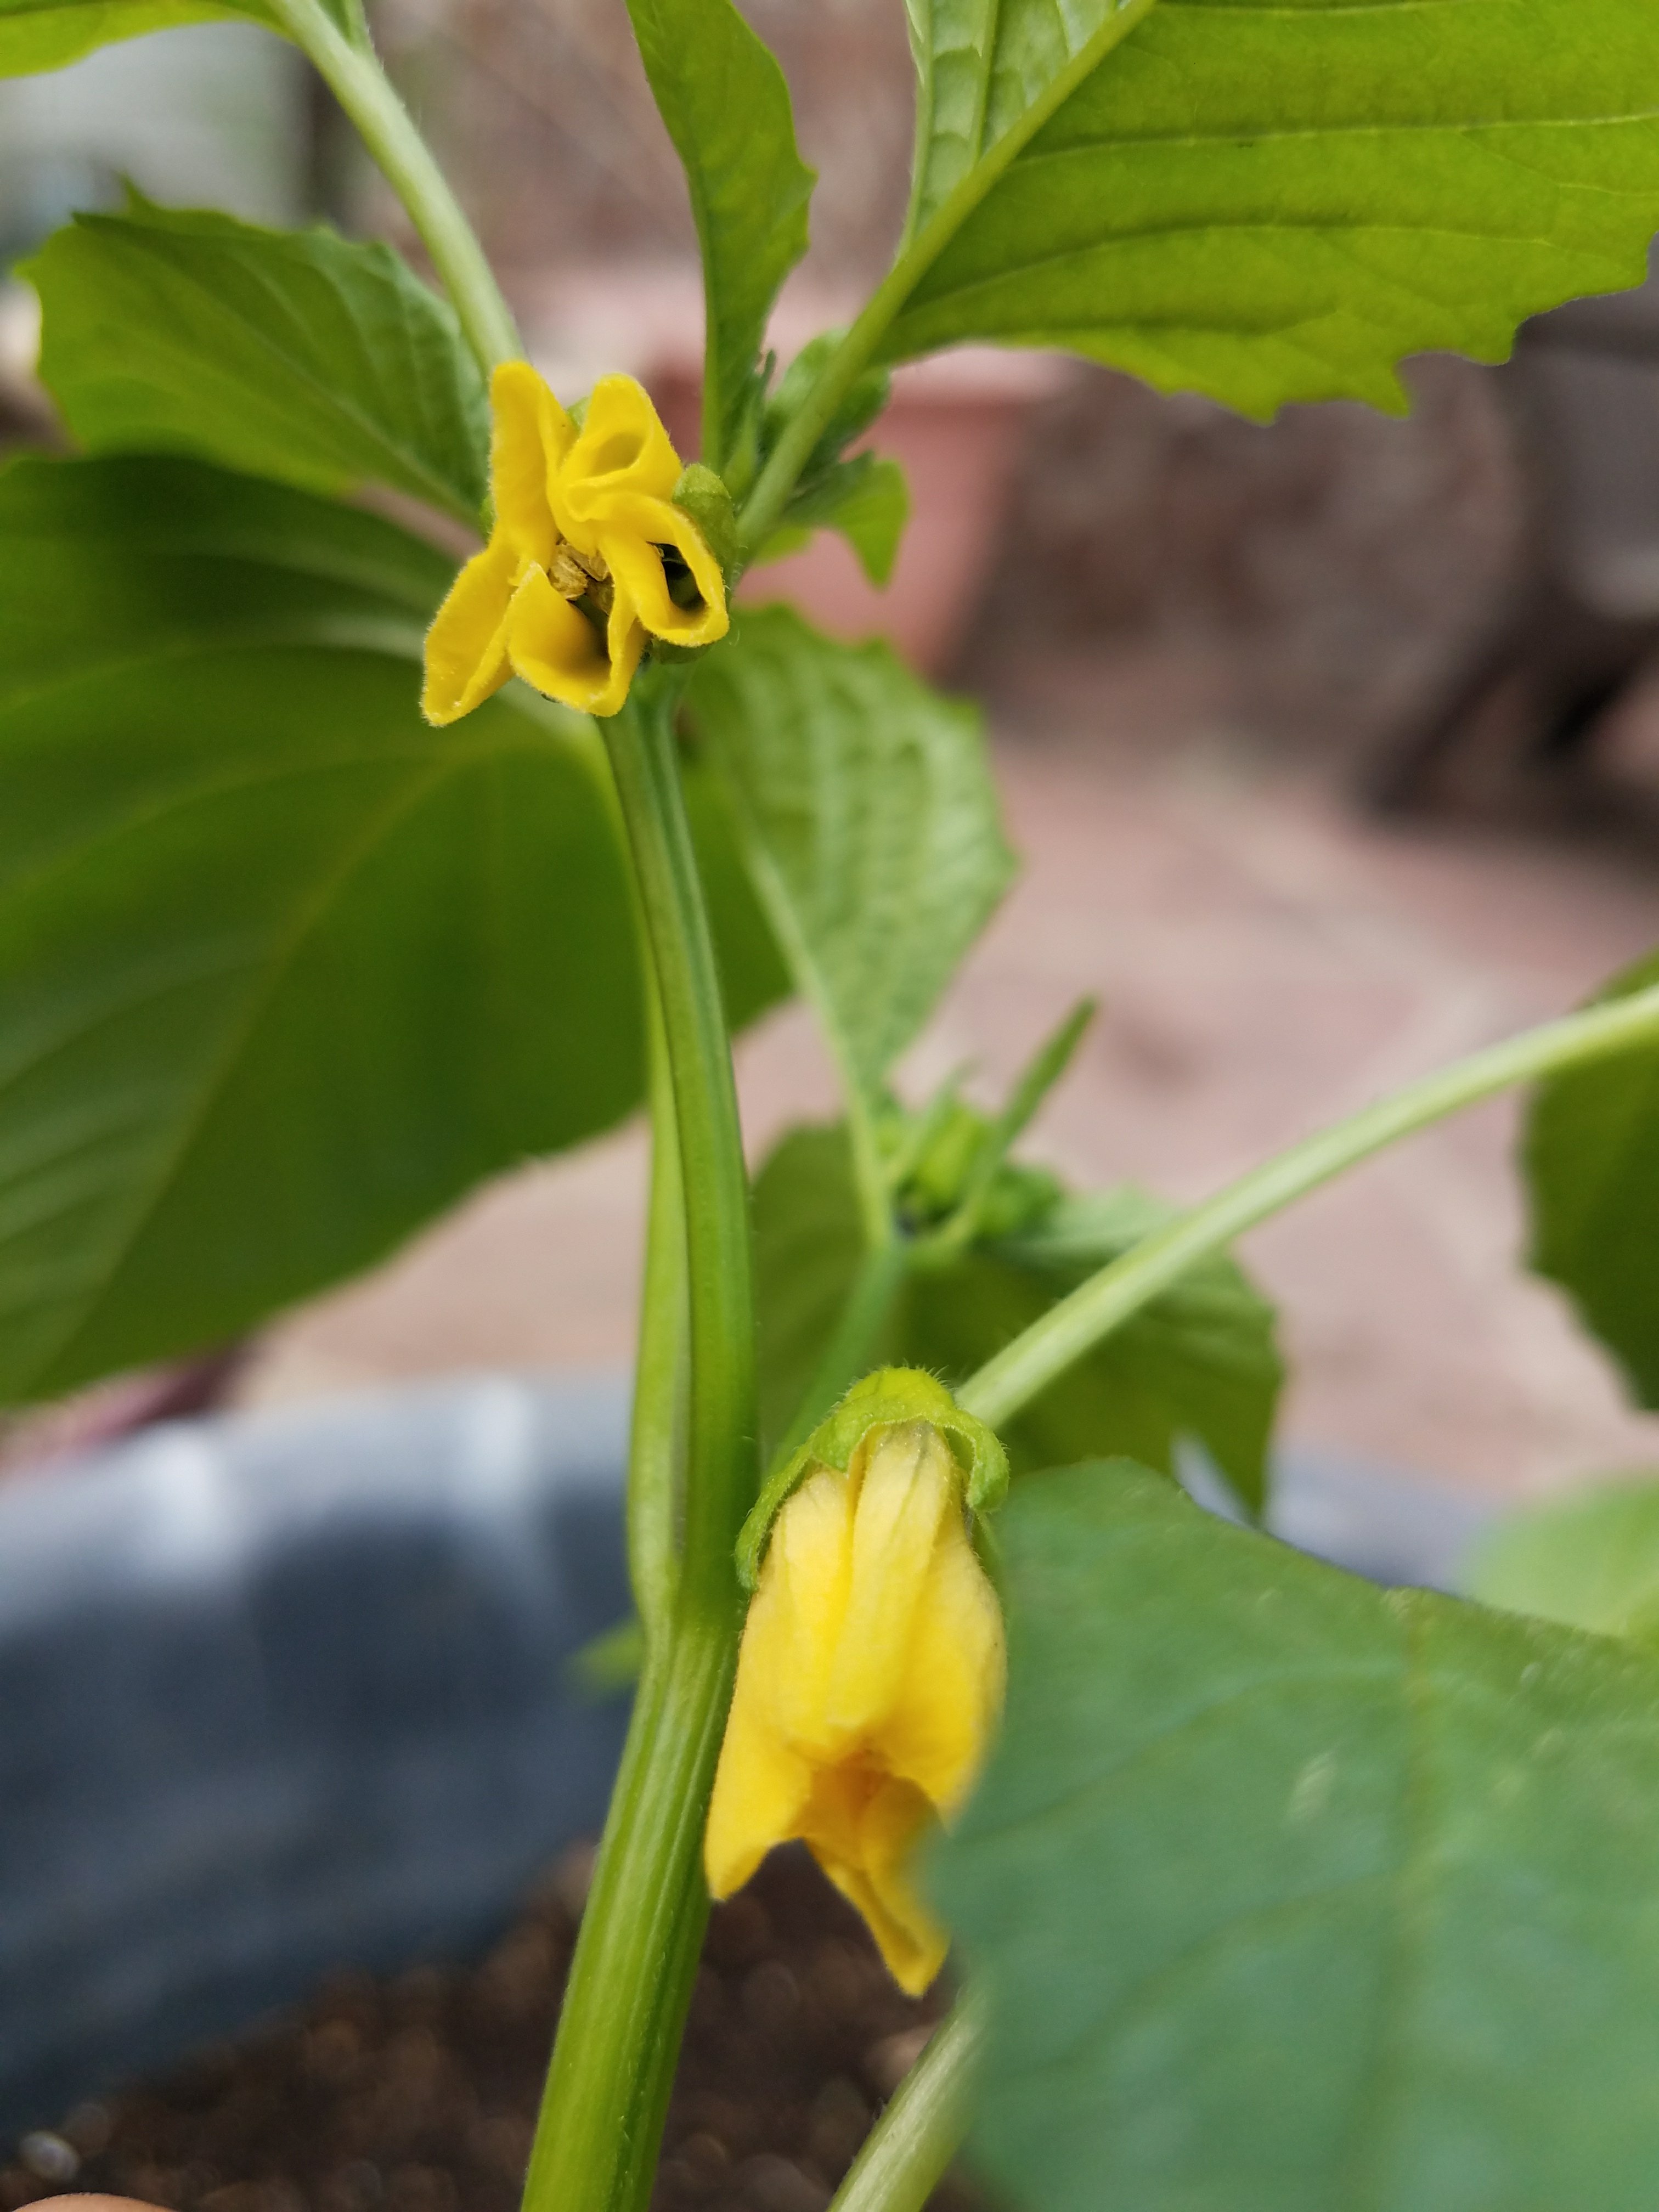 Flowers on a tomatillo plant